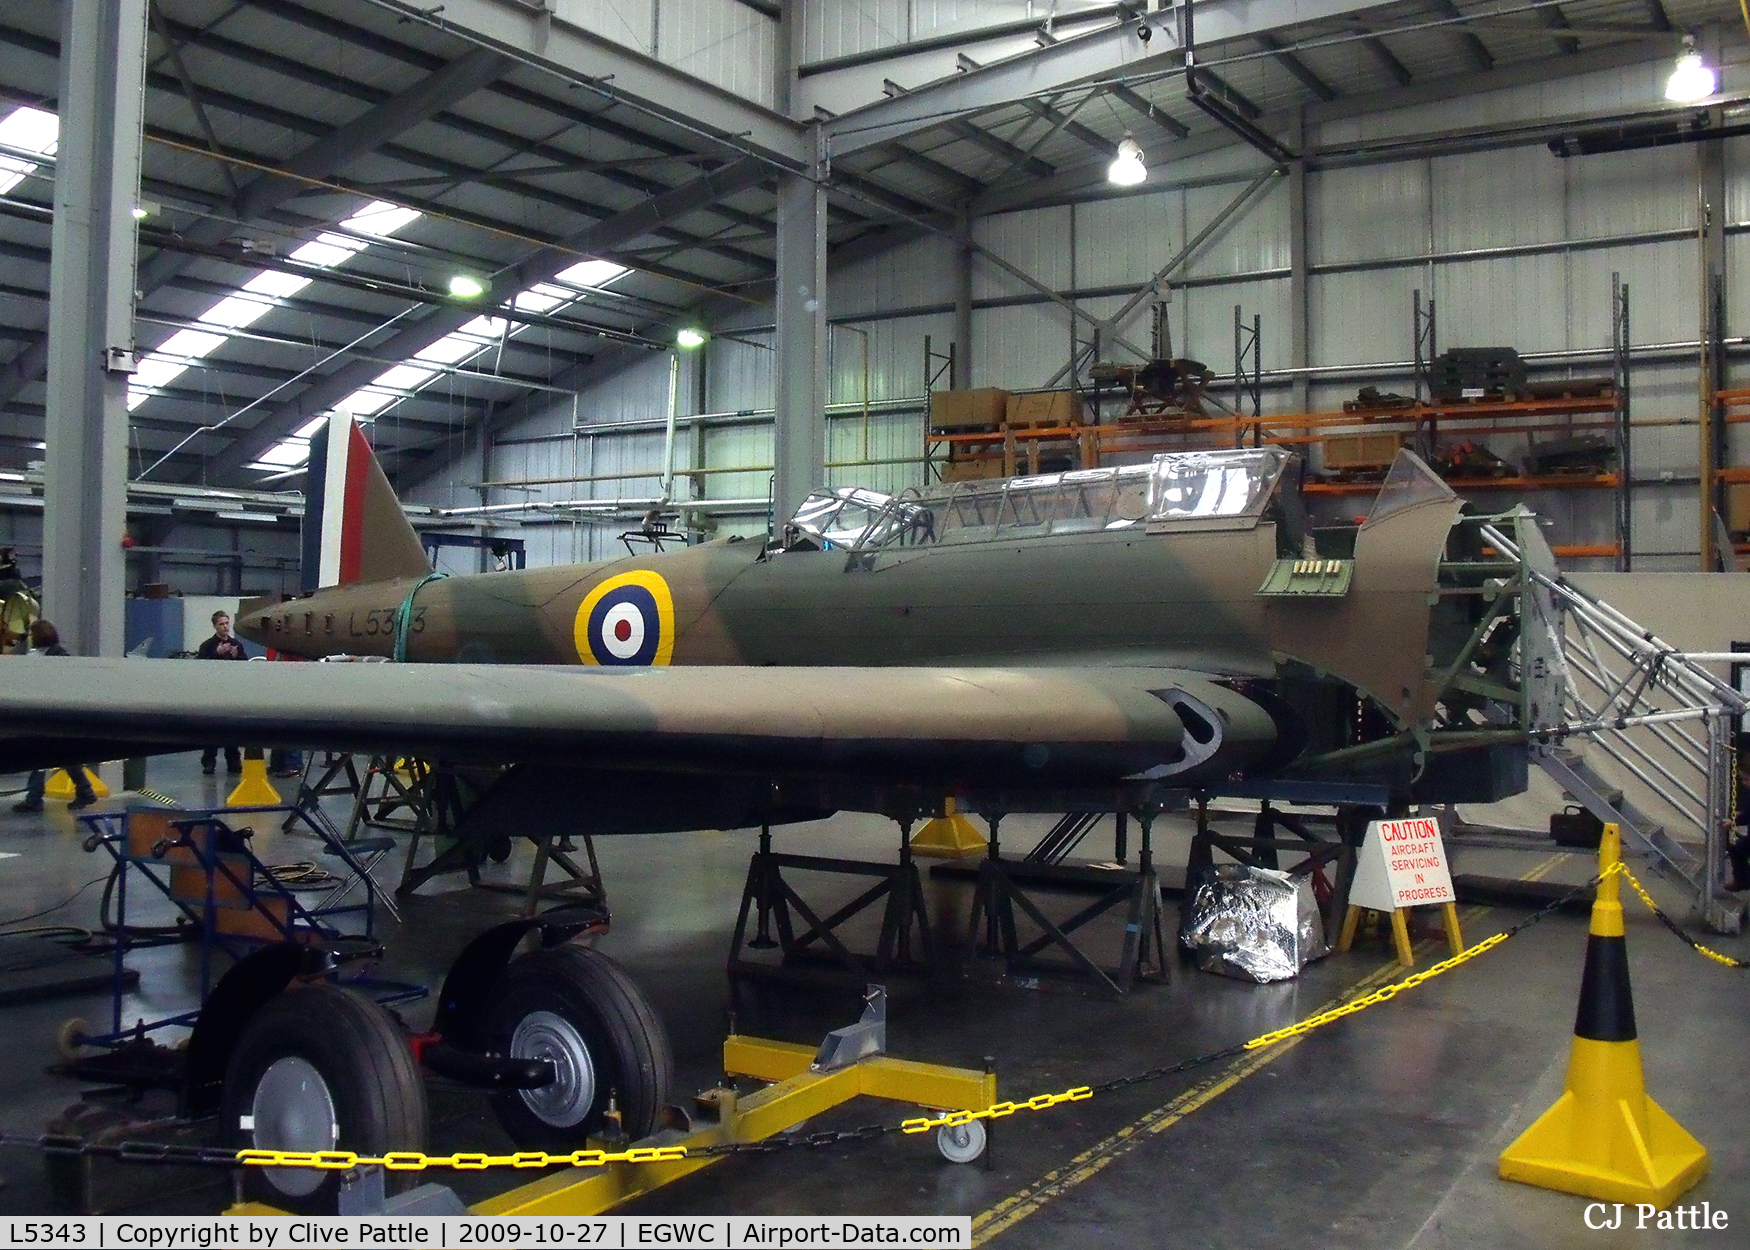 L5343, 1939 Fairey Battle I C/N L5343, Pictured within the Michael Beetham Conservation Centre annex to the RAF Museum at Cosford undergoing restoration to display standard. It was later moved to RAFM Hendon.